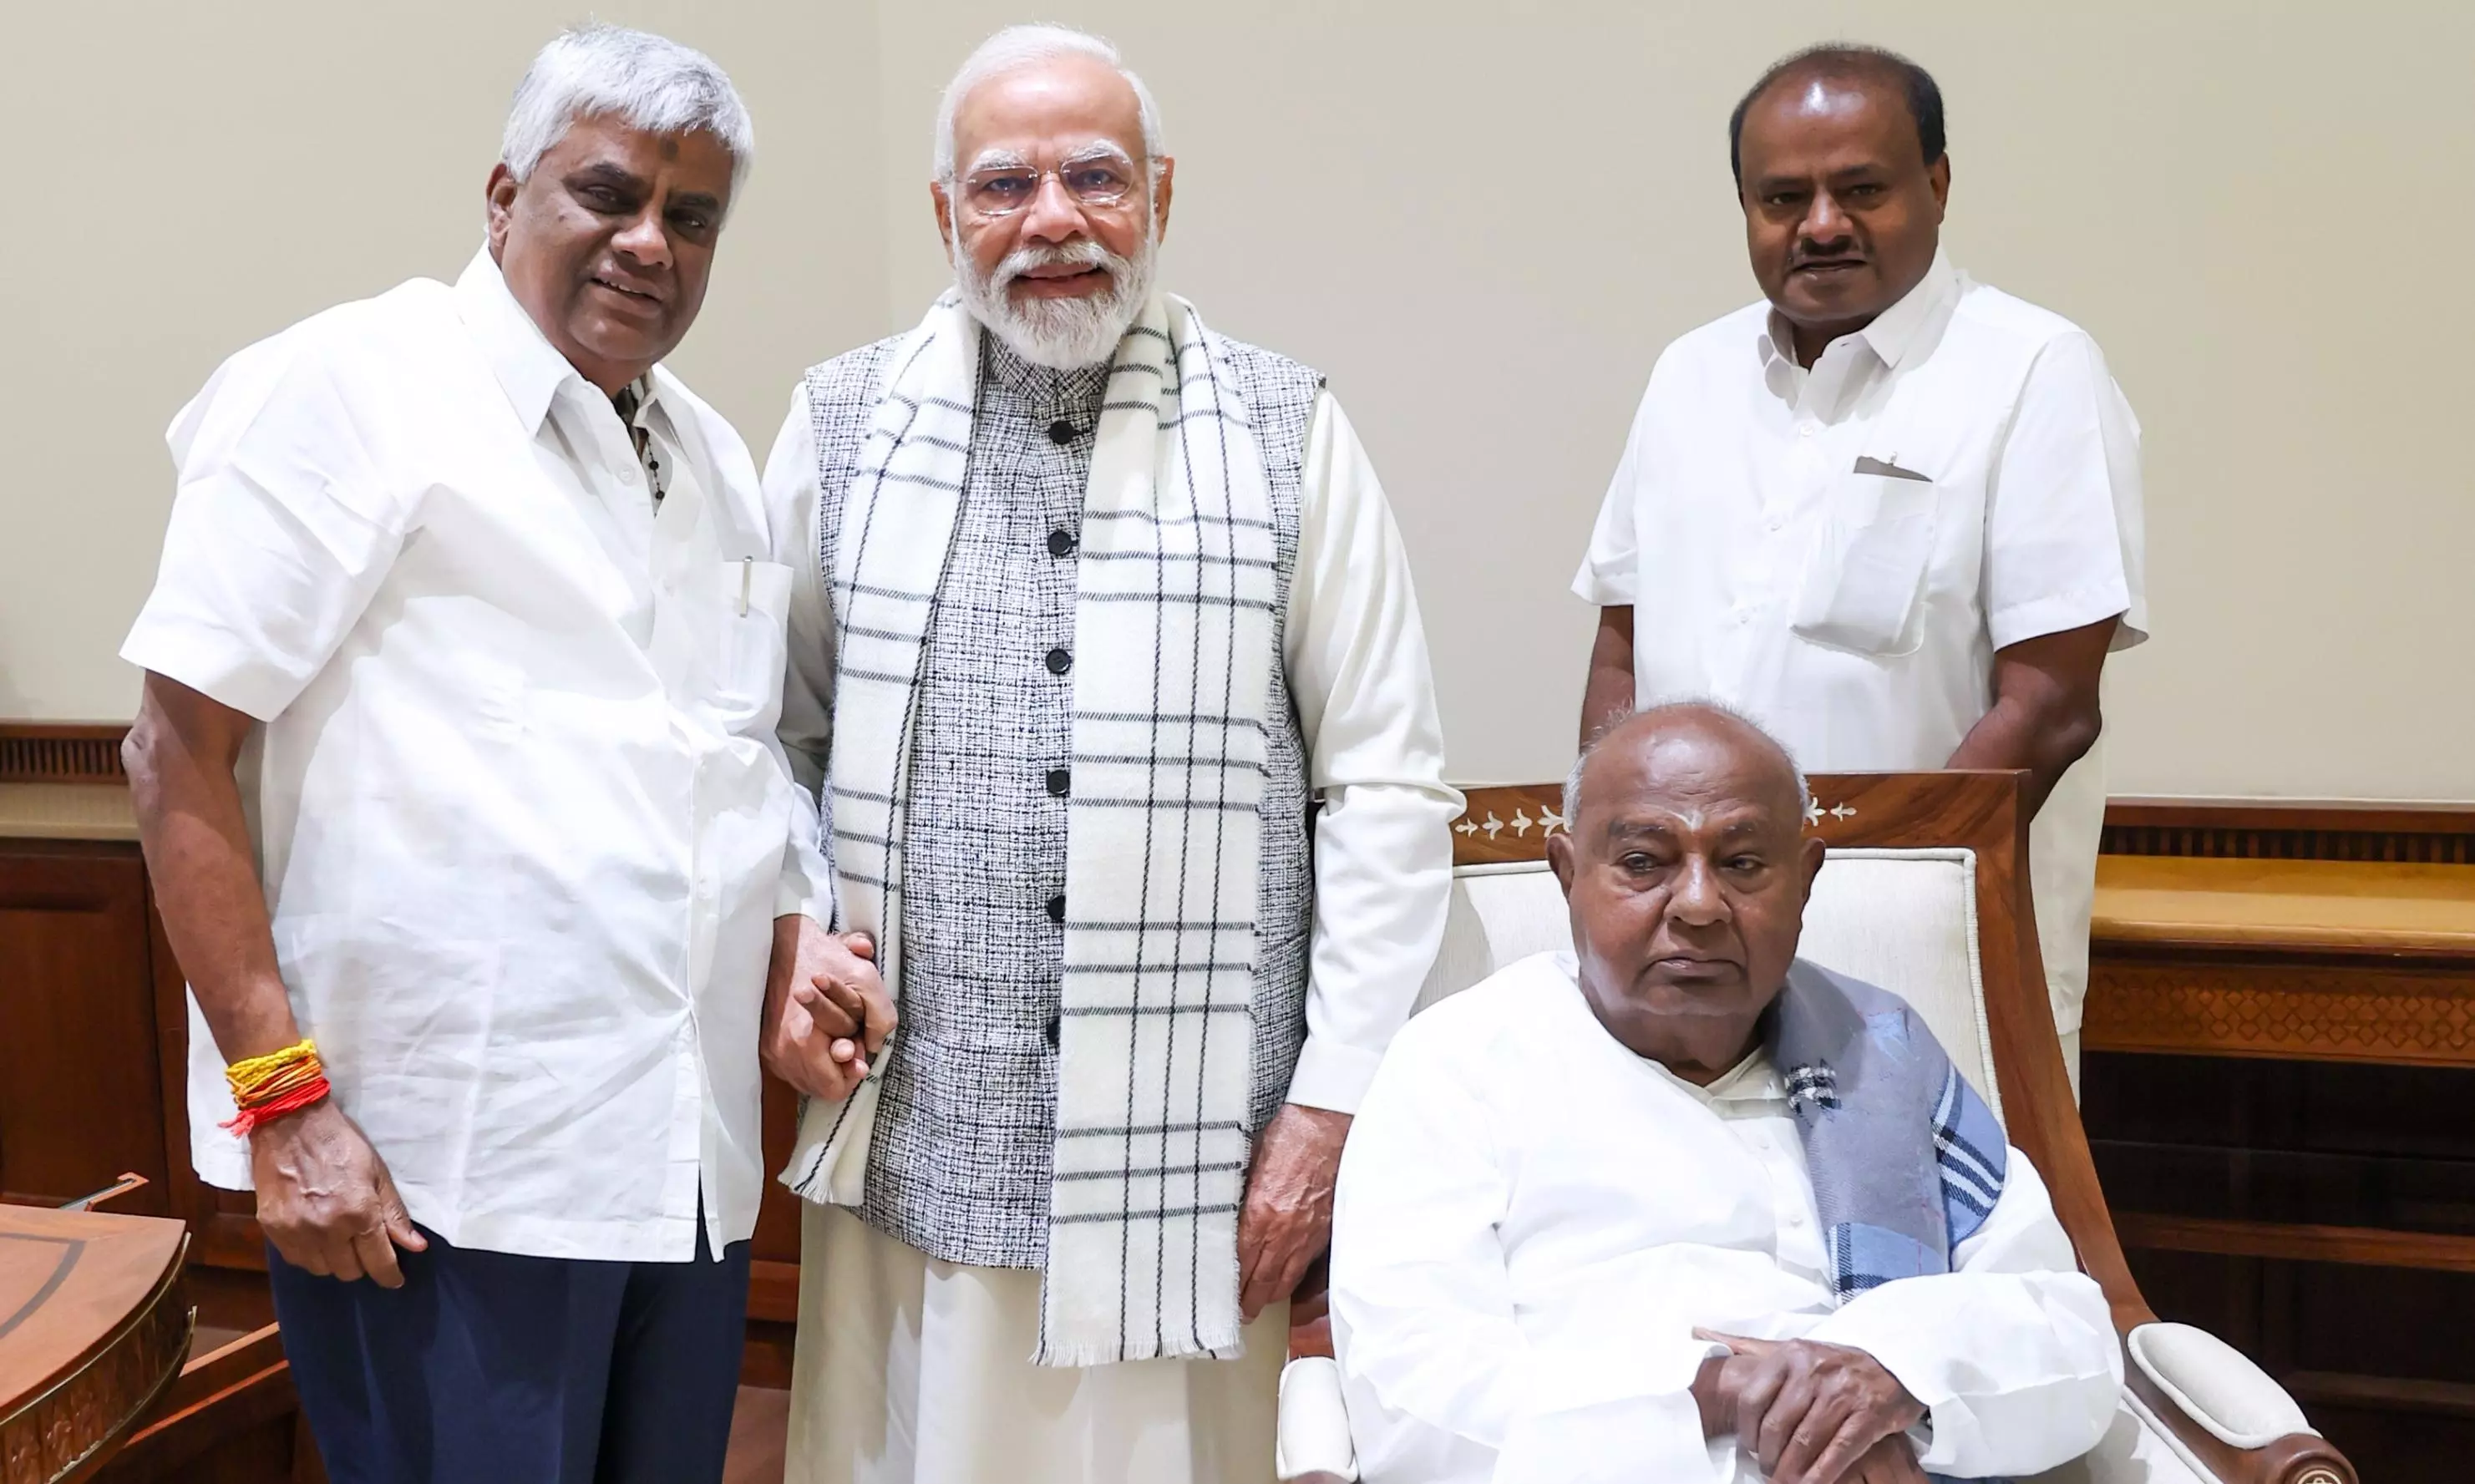 Modi meets Deve Gowda, lauds JD(S) chief’s ‘exemplary’ contribution to nation